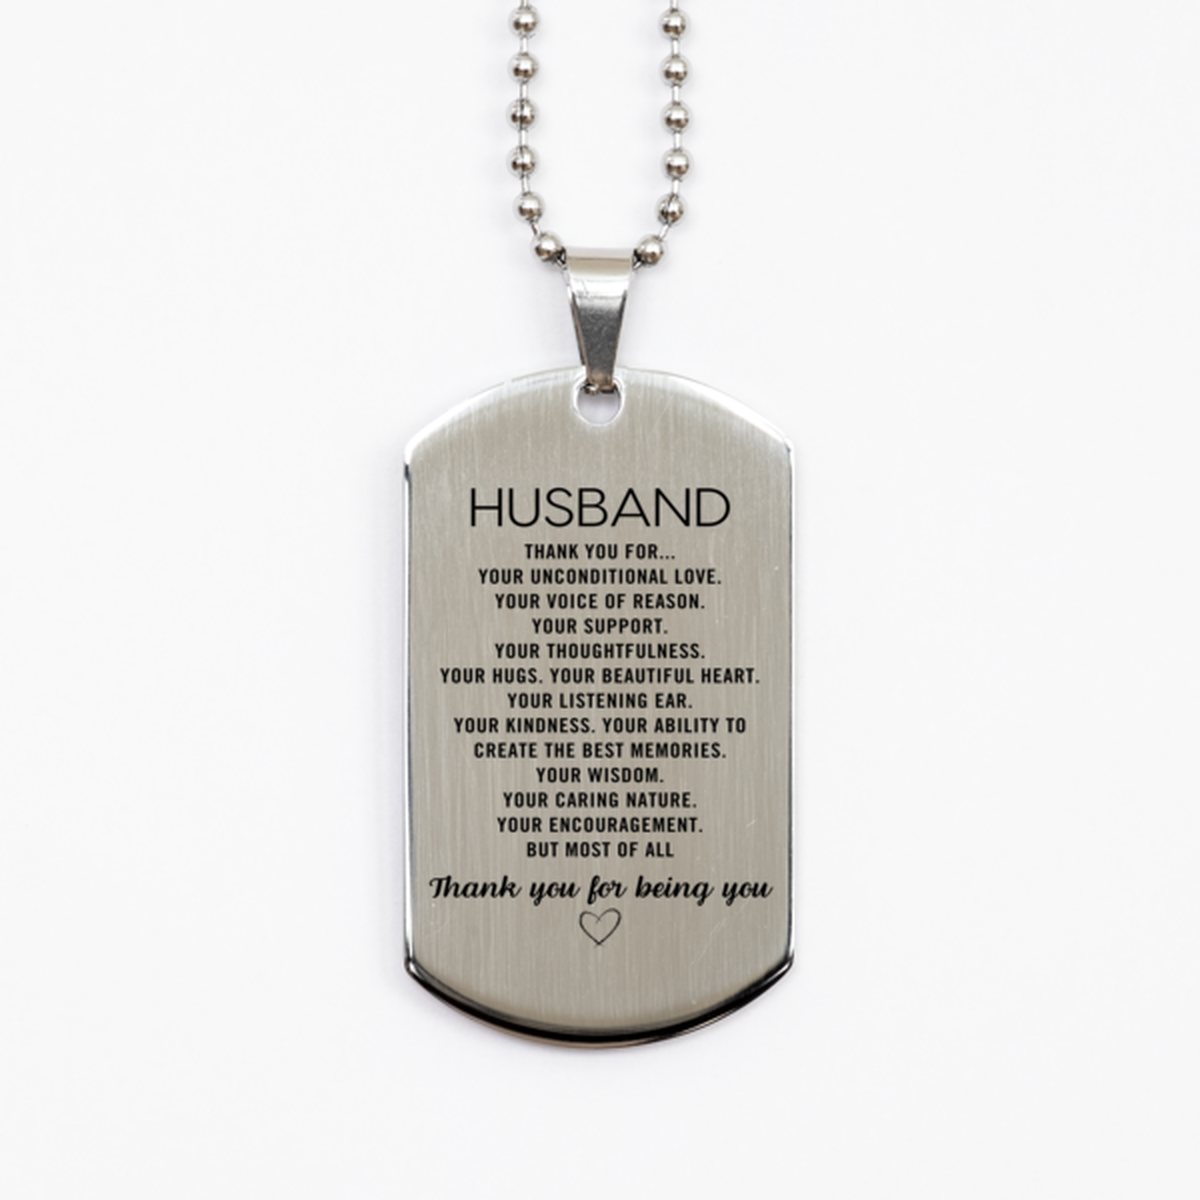 Husband Silver Dog Tag Custom, Engraved Gifts For Husband Christmas Graduation Birthday Gifts for Men Women Husband Thank you for Your unconditional love